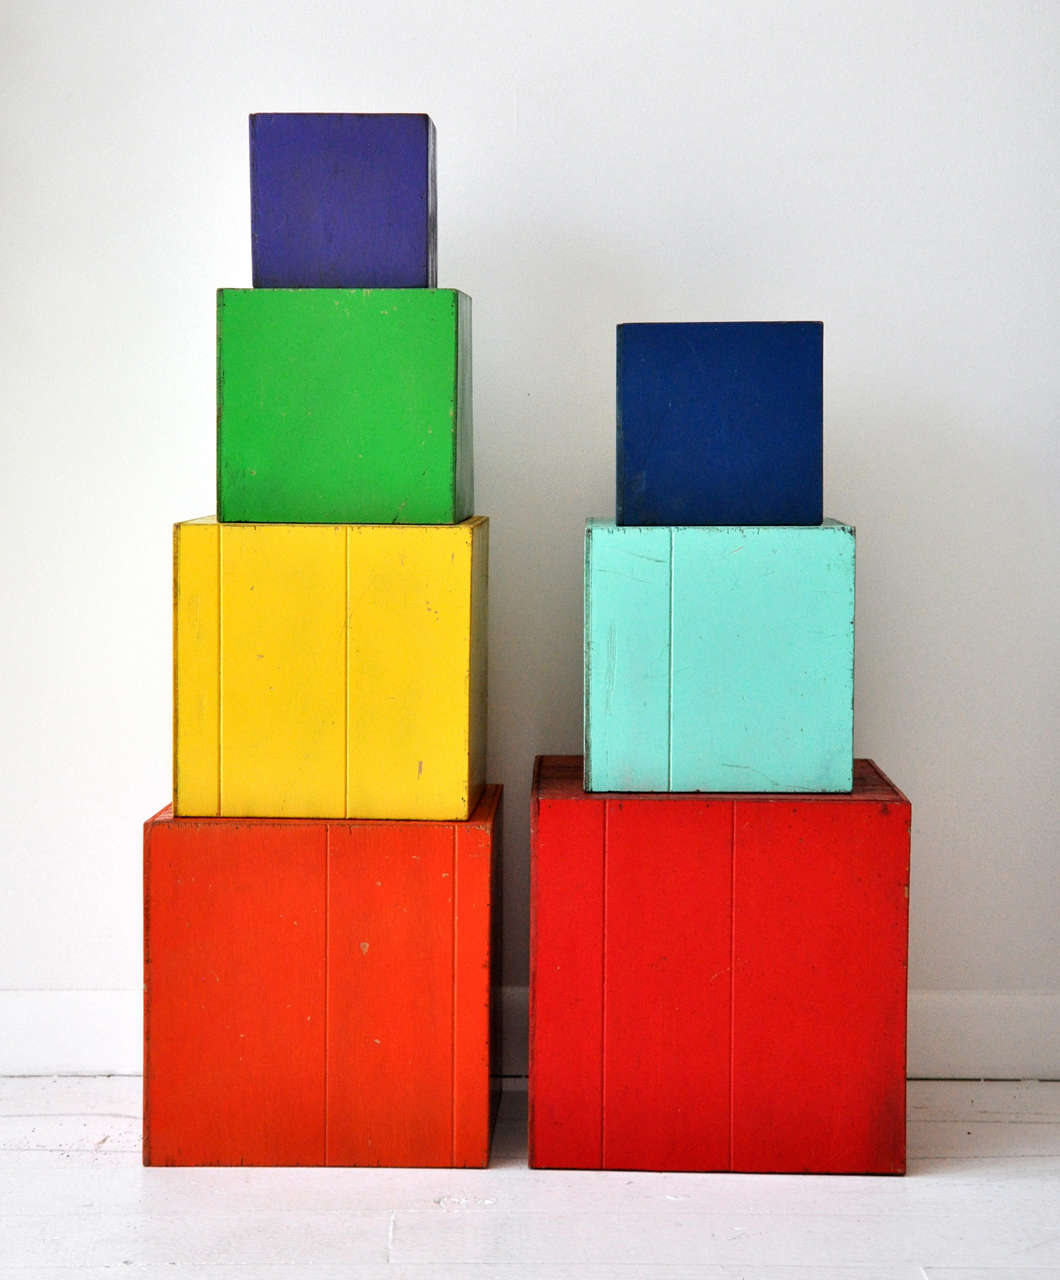 Three Amish Multi-Colored  Stacked Blocks. Made from Wood and Painted. 
Dimensions of Each:
Green: 7.5